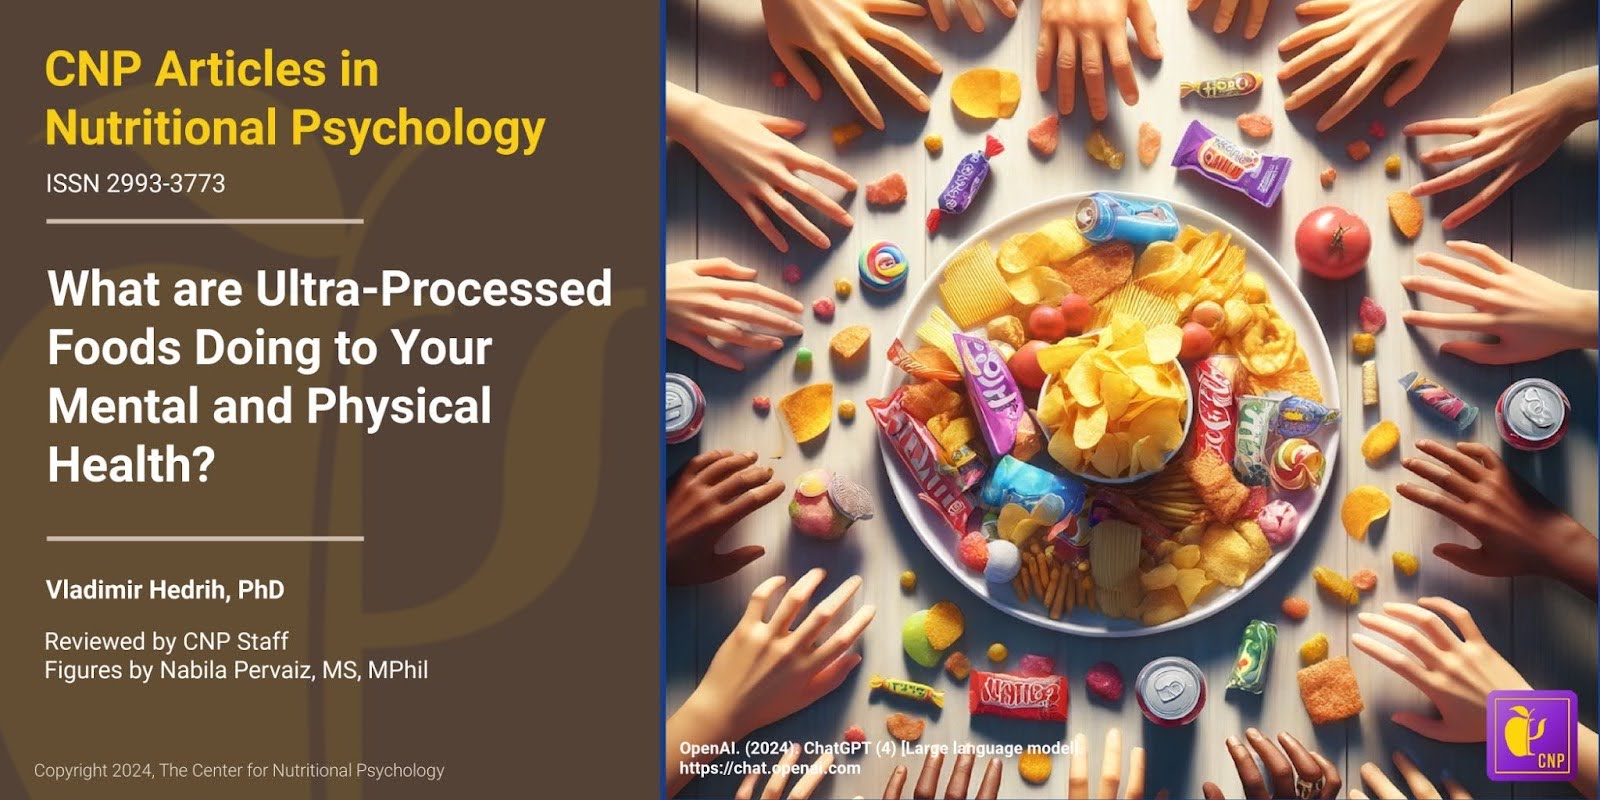 What are Ultra-Processed Foods Doing to Your Mental and Physical Health